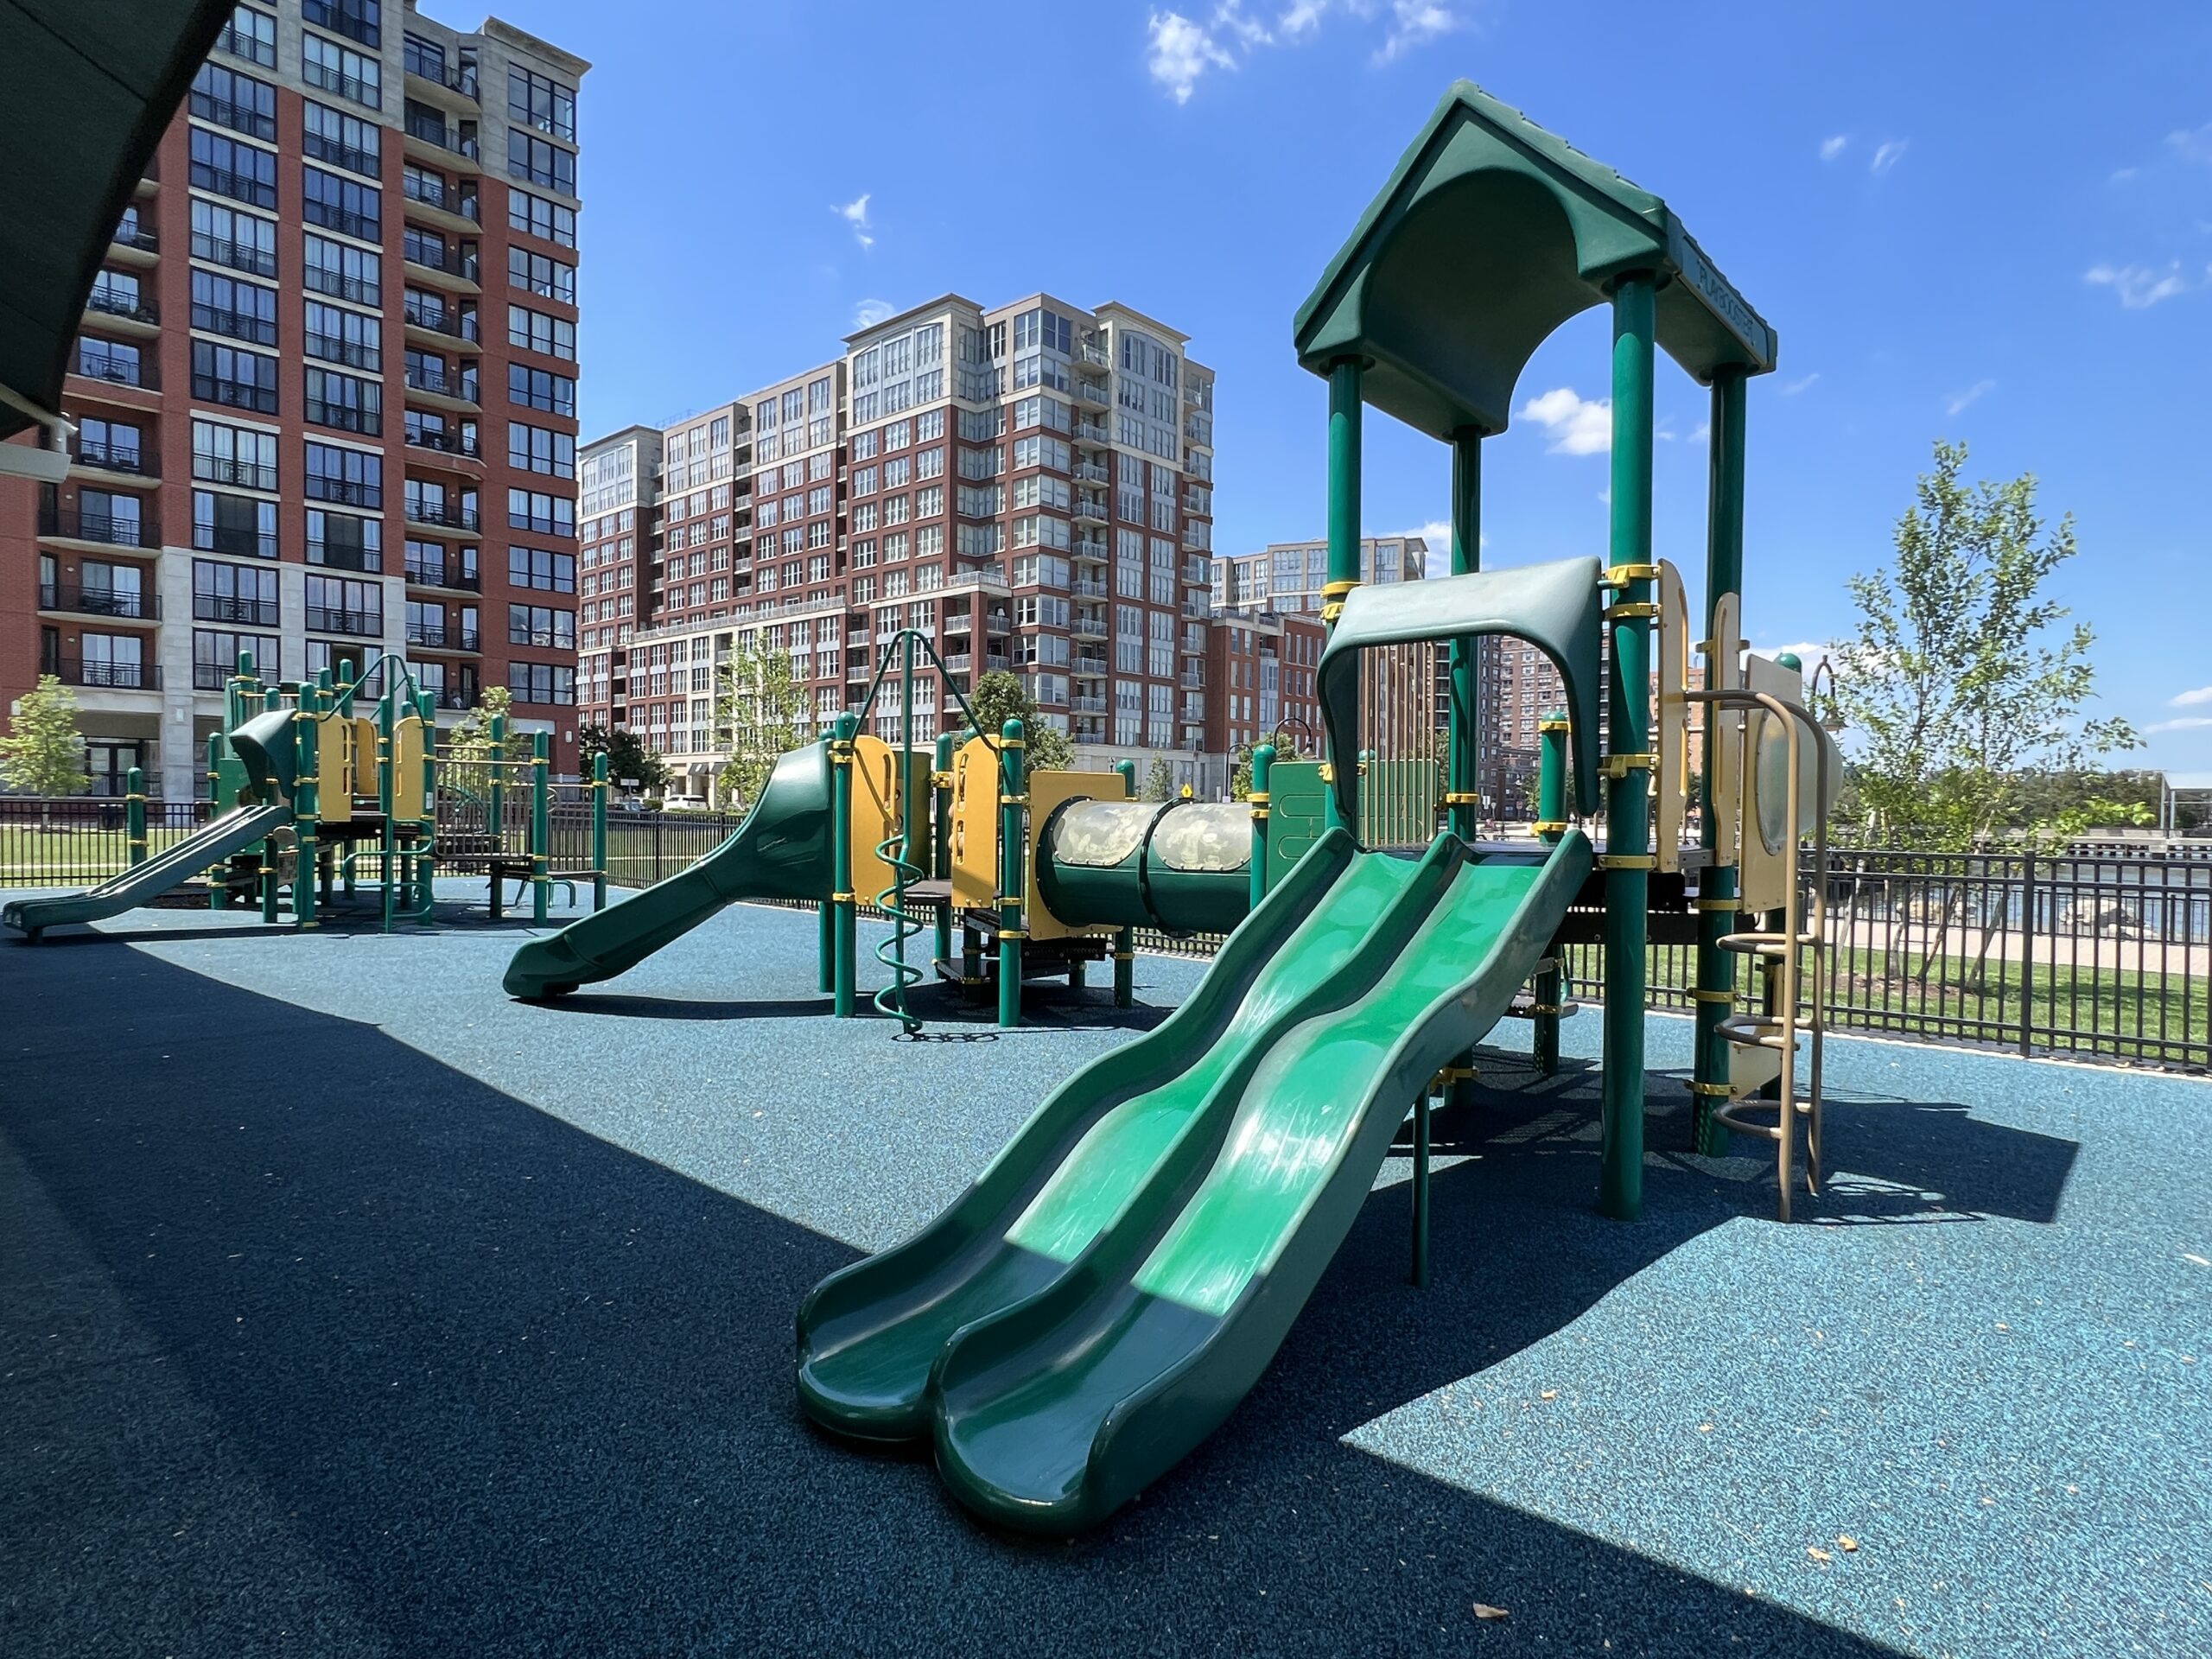 Maxwell Place Park Playground in Hoboken NJ - WIDE image - both playgrounds back view